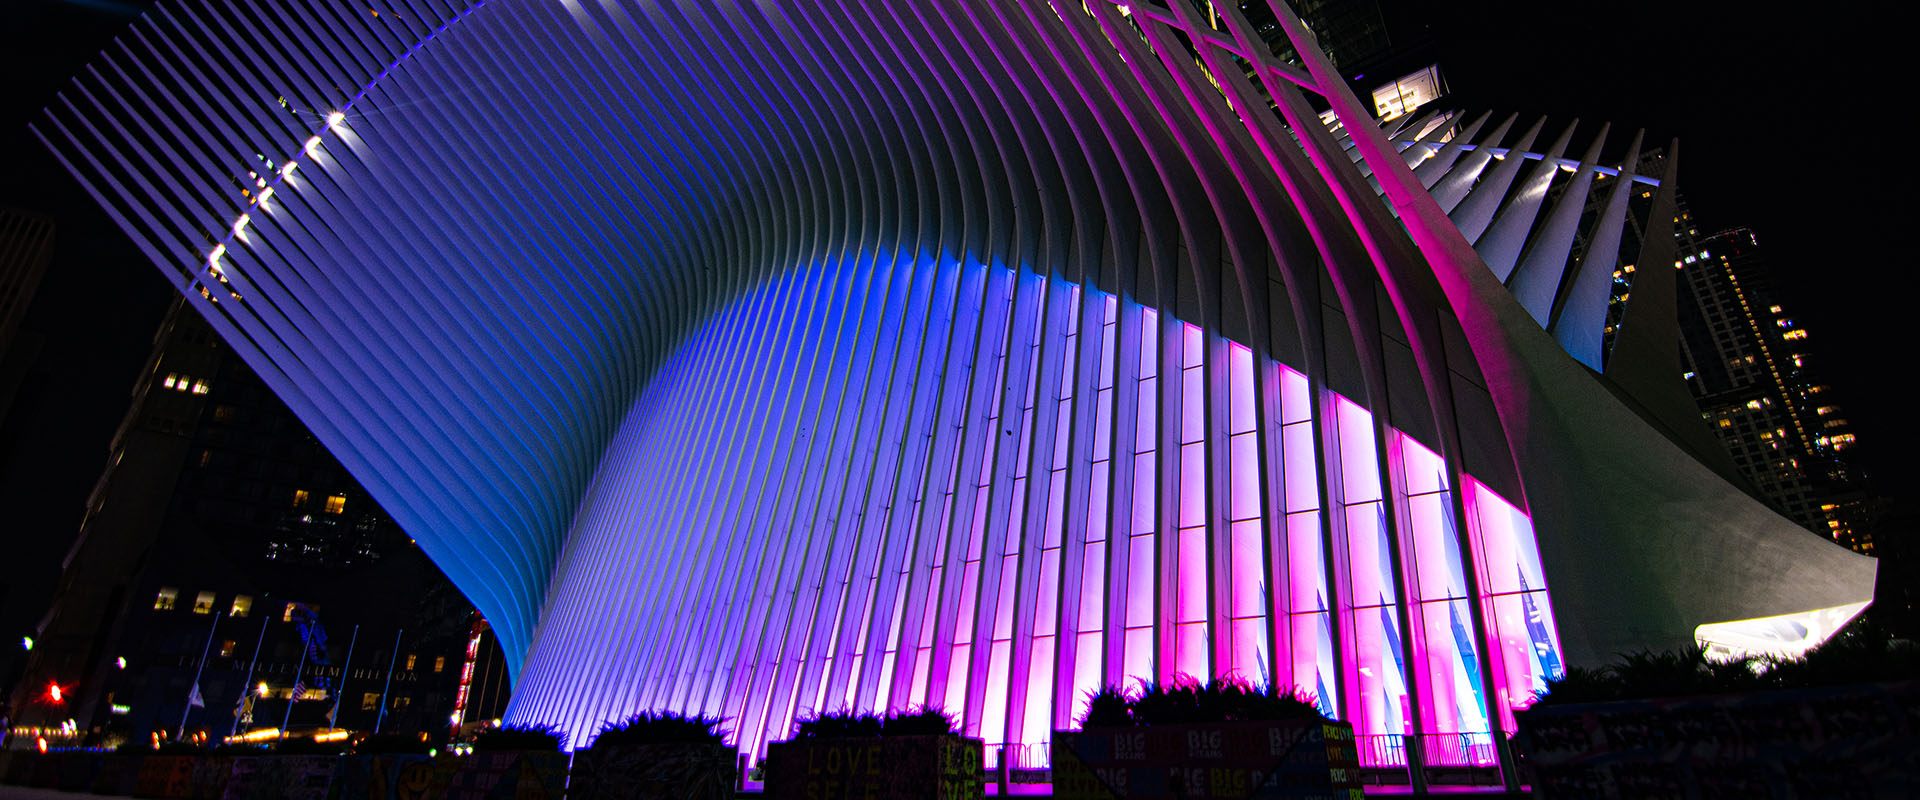 Oculus in New York, NY